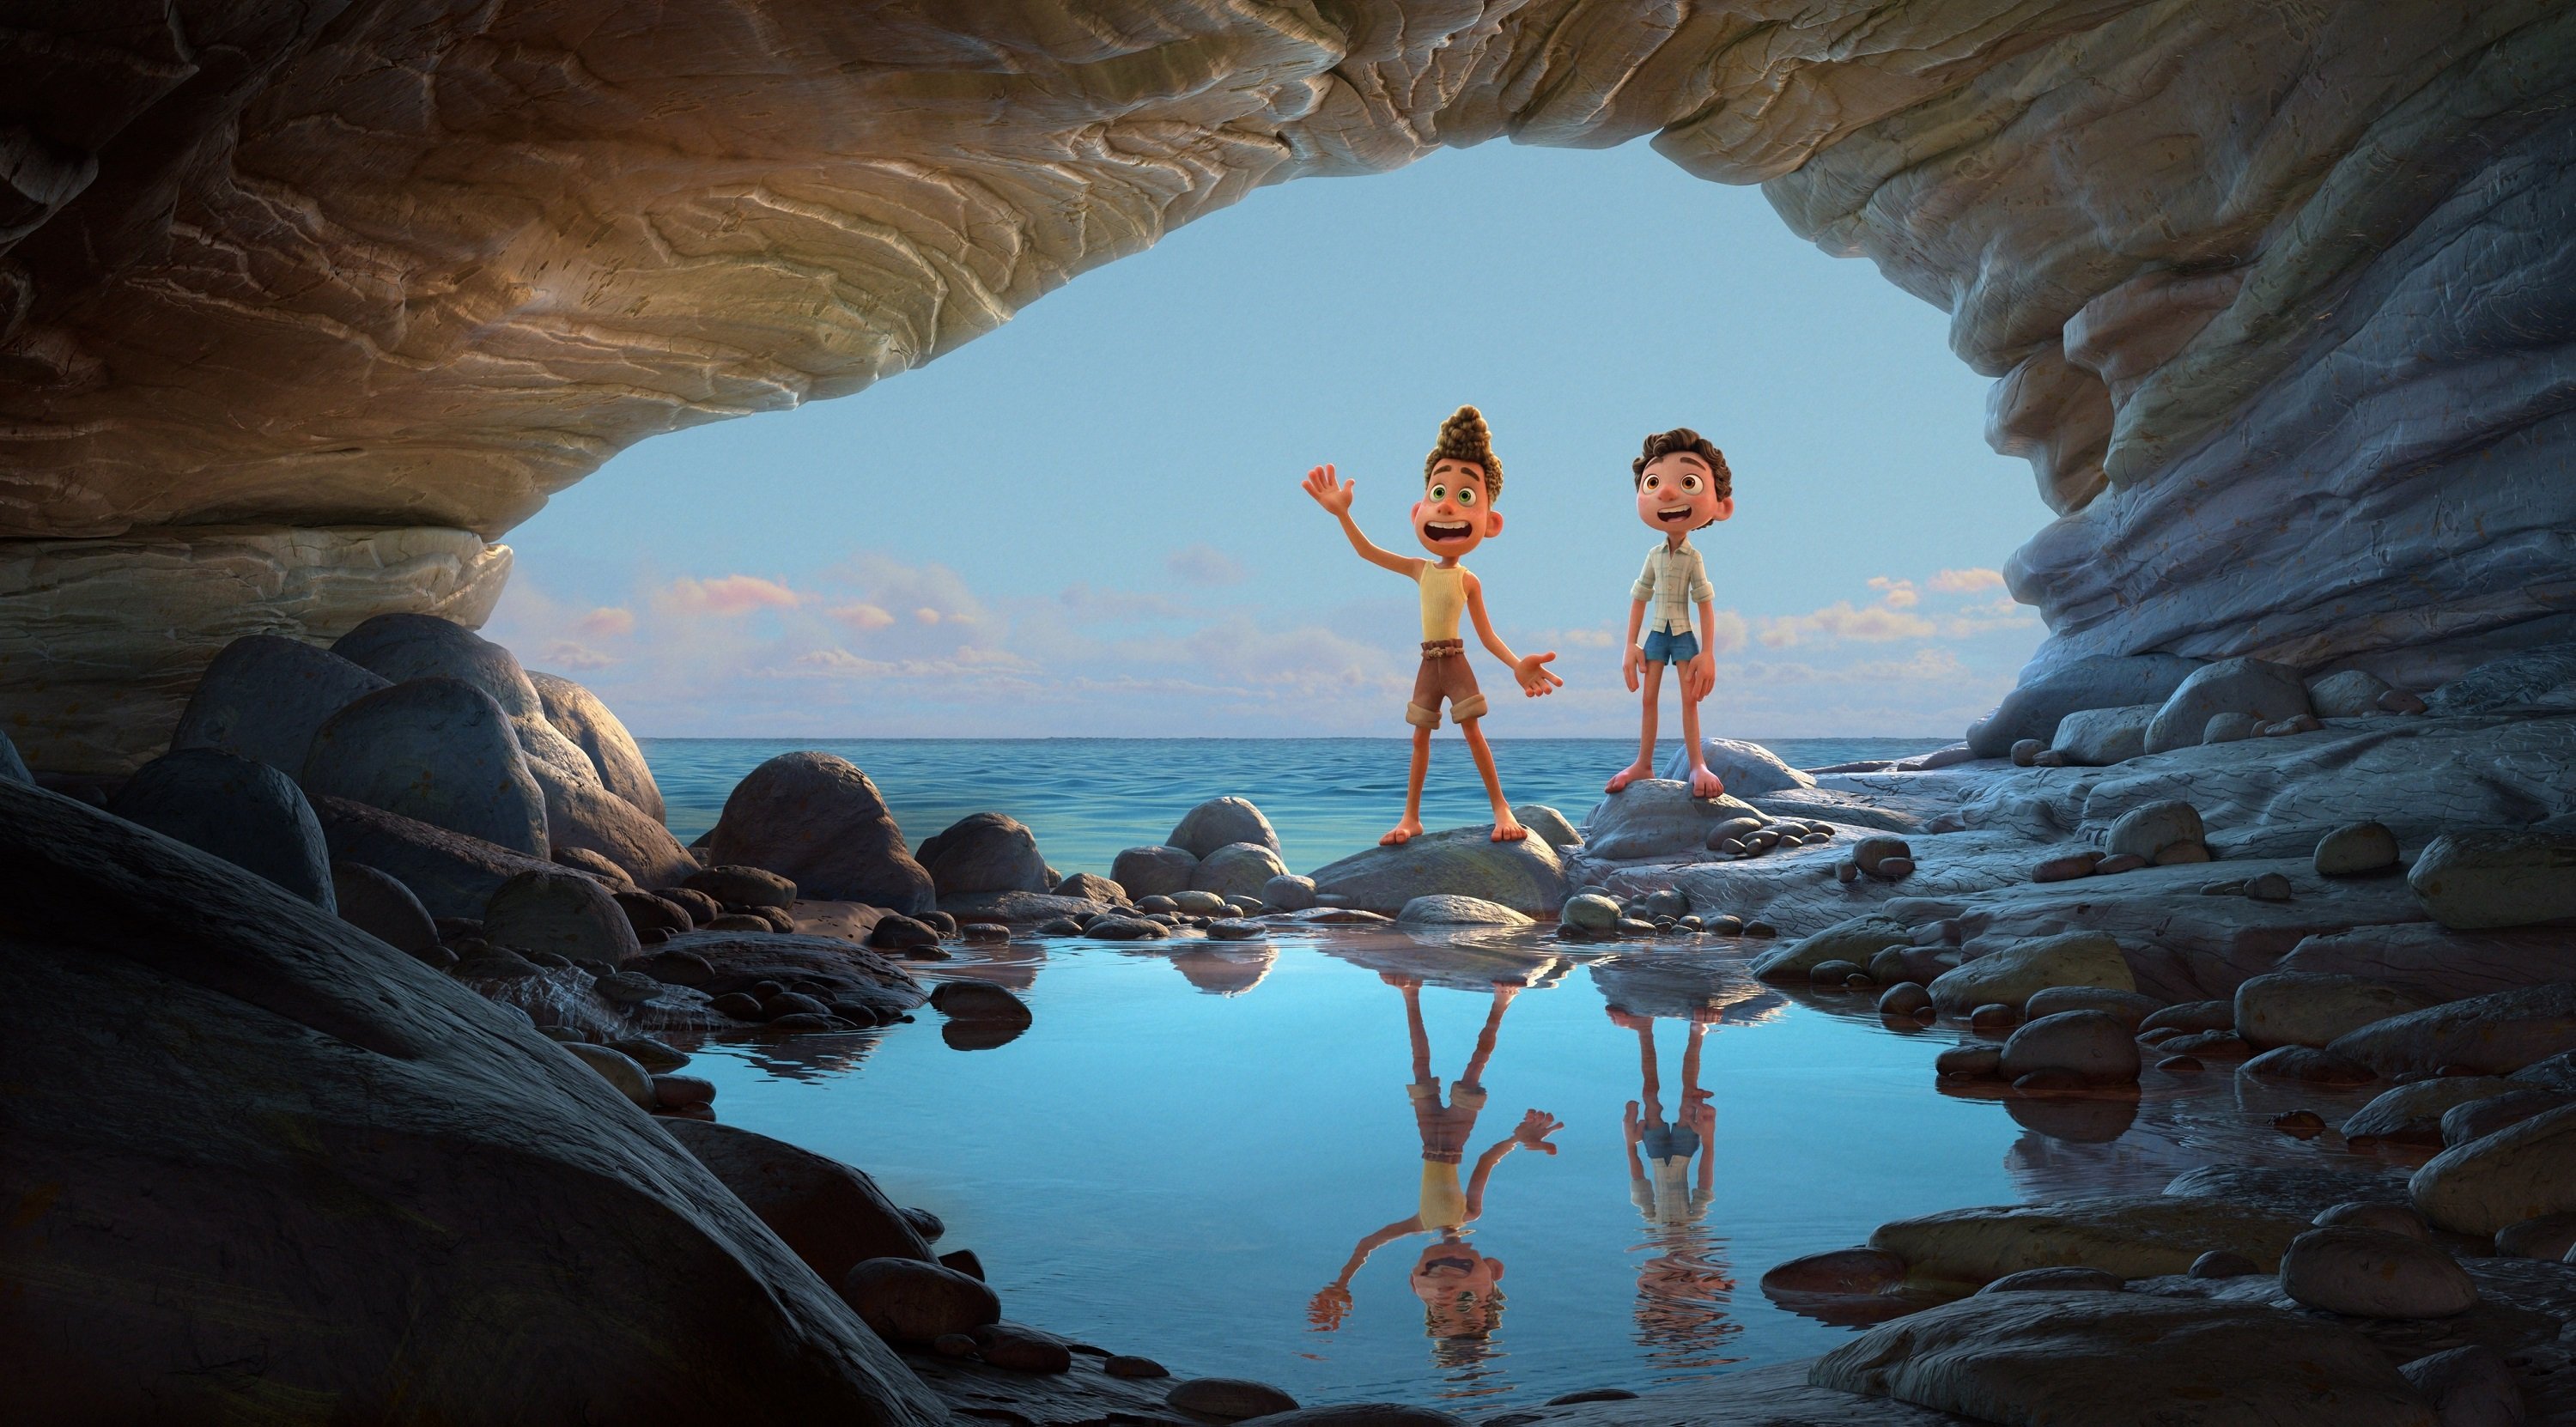 Alberto and Luca looking into a cave in the Disney Pixar movie